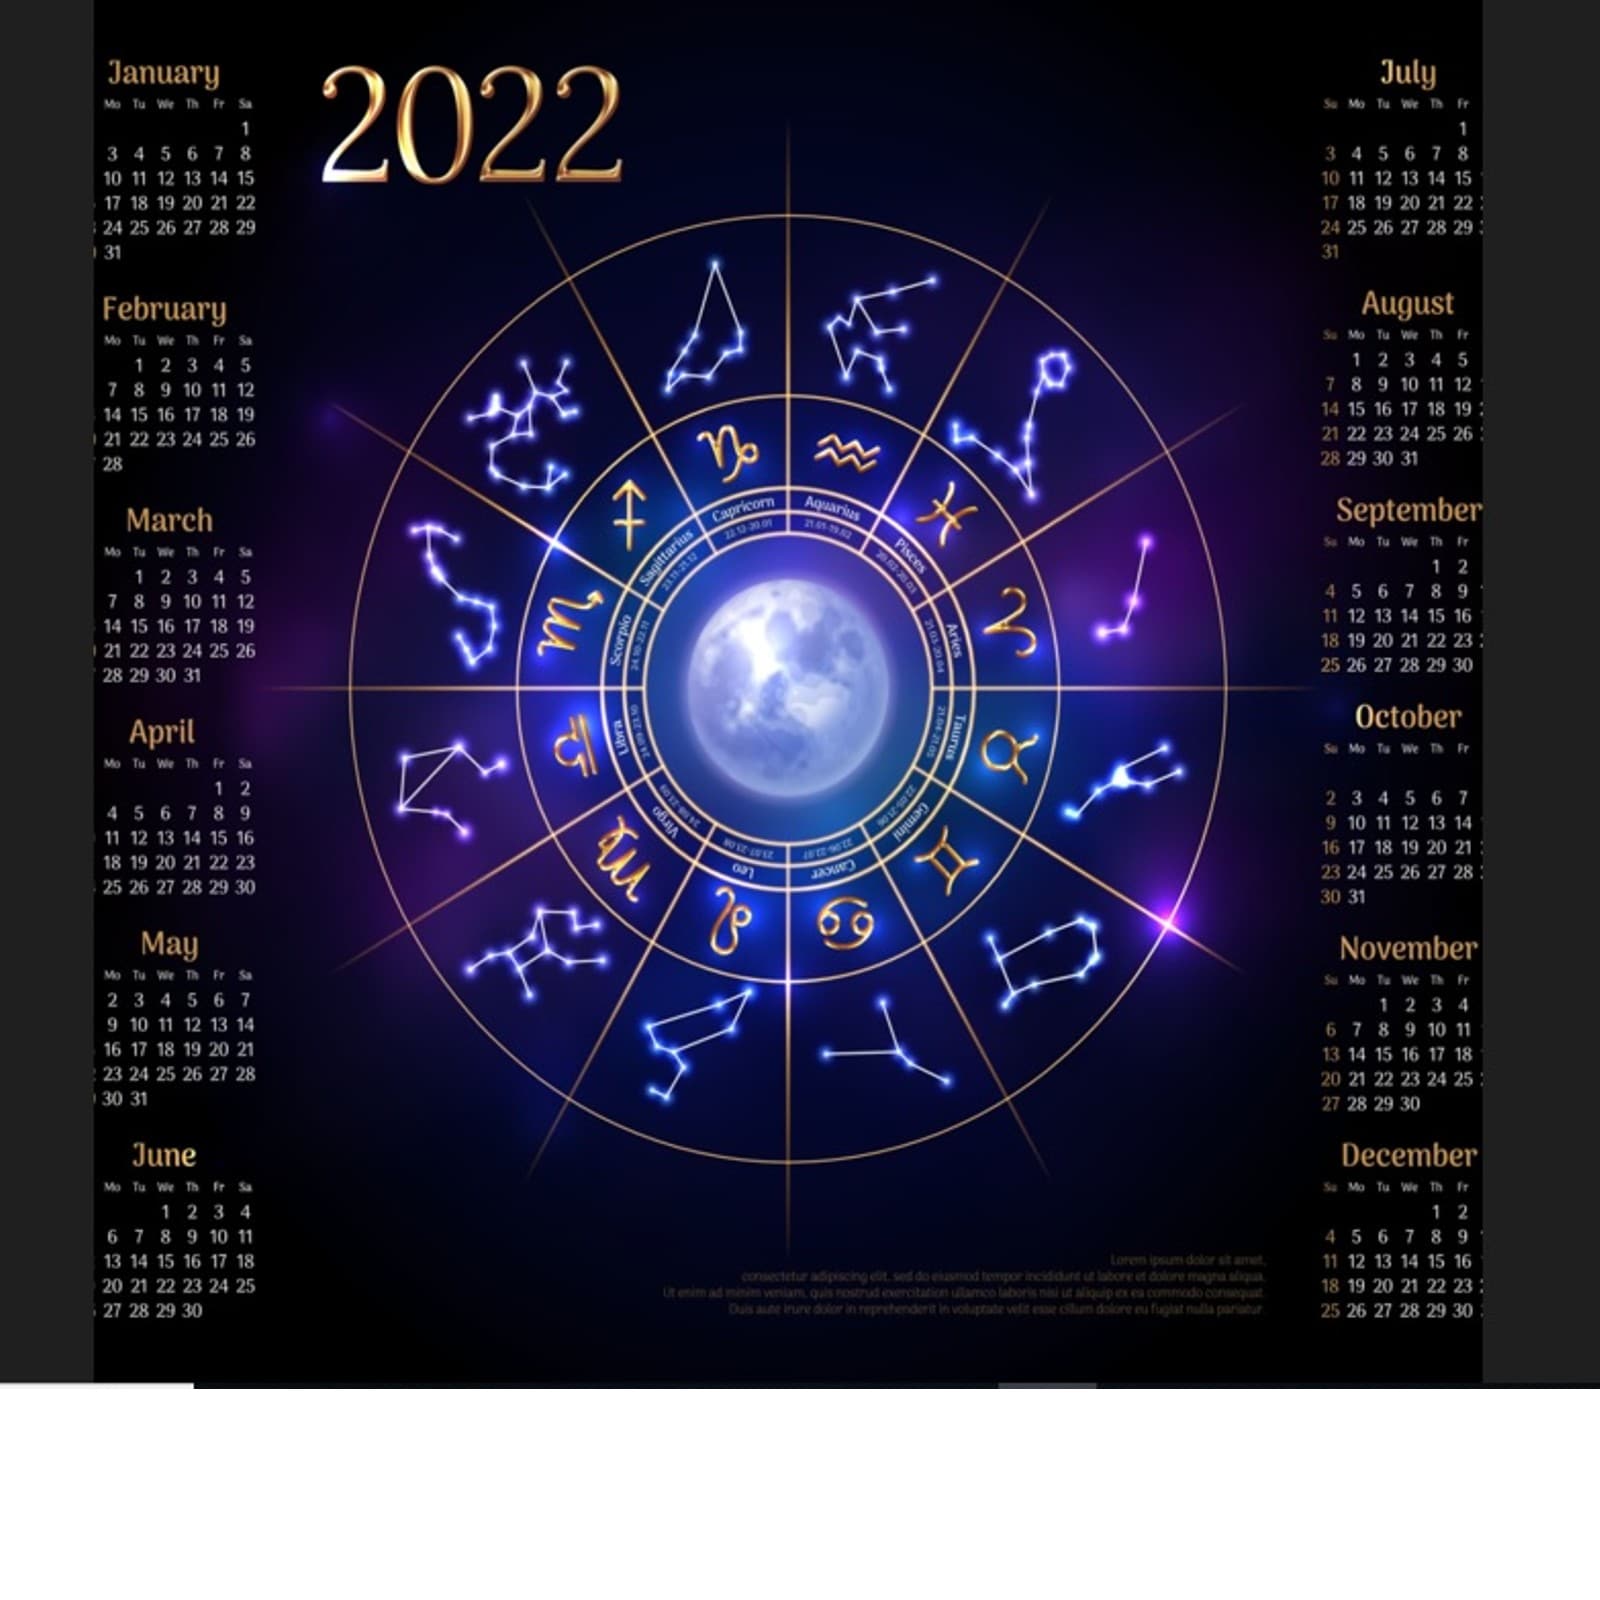 Horoscope Today August 23 22 Check Out Daily Astrological Prediction For Aries Taurus Libra Sagittarius And Other Zodiac Signs For Tuesday